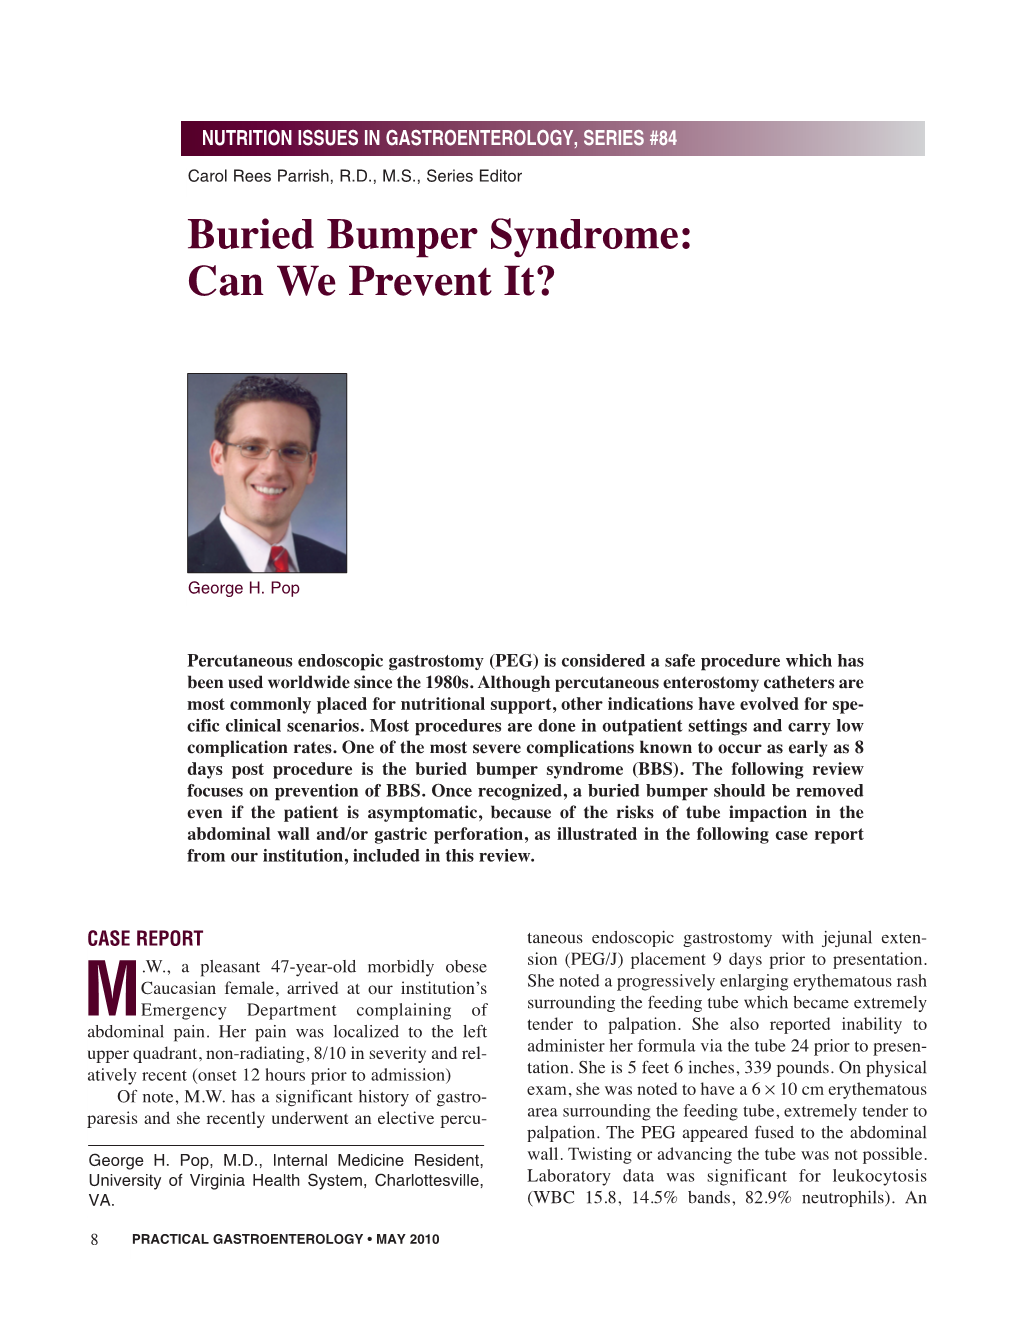 Buried Bumper Syndrome: Can We Prevent It?